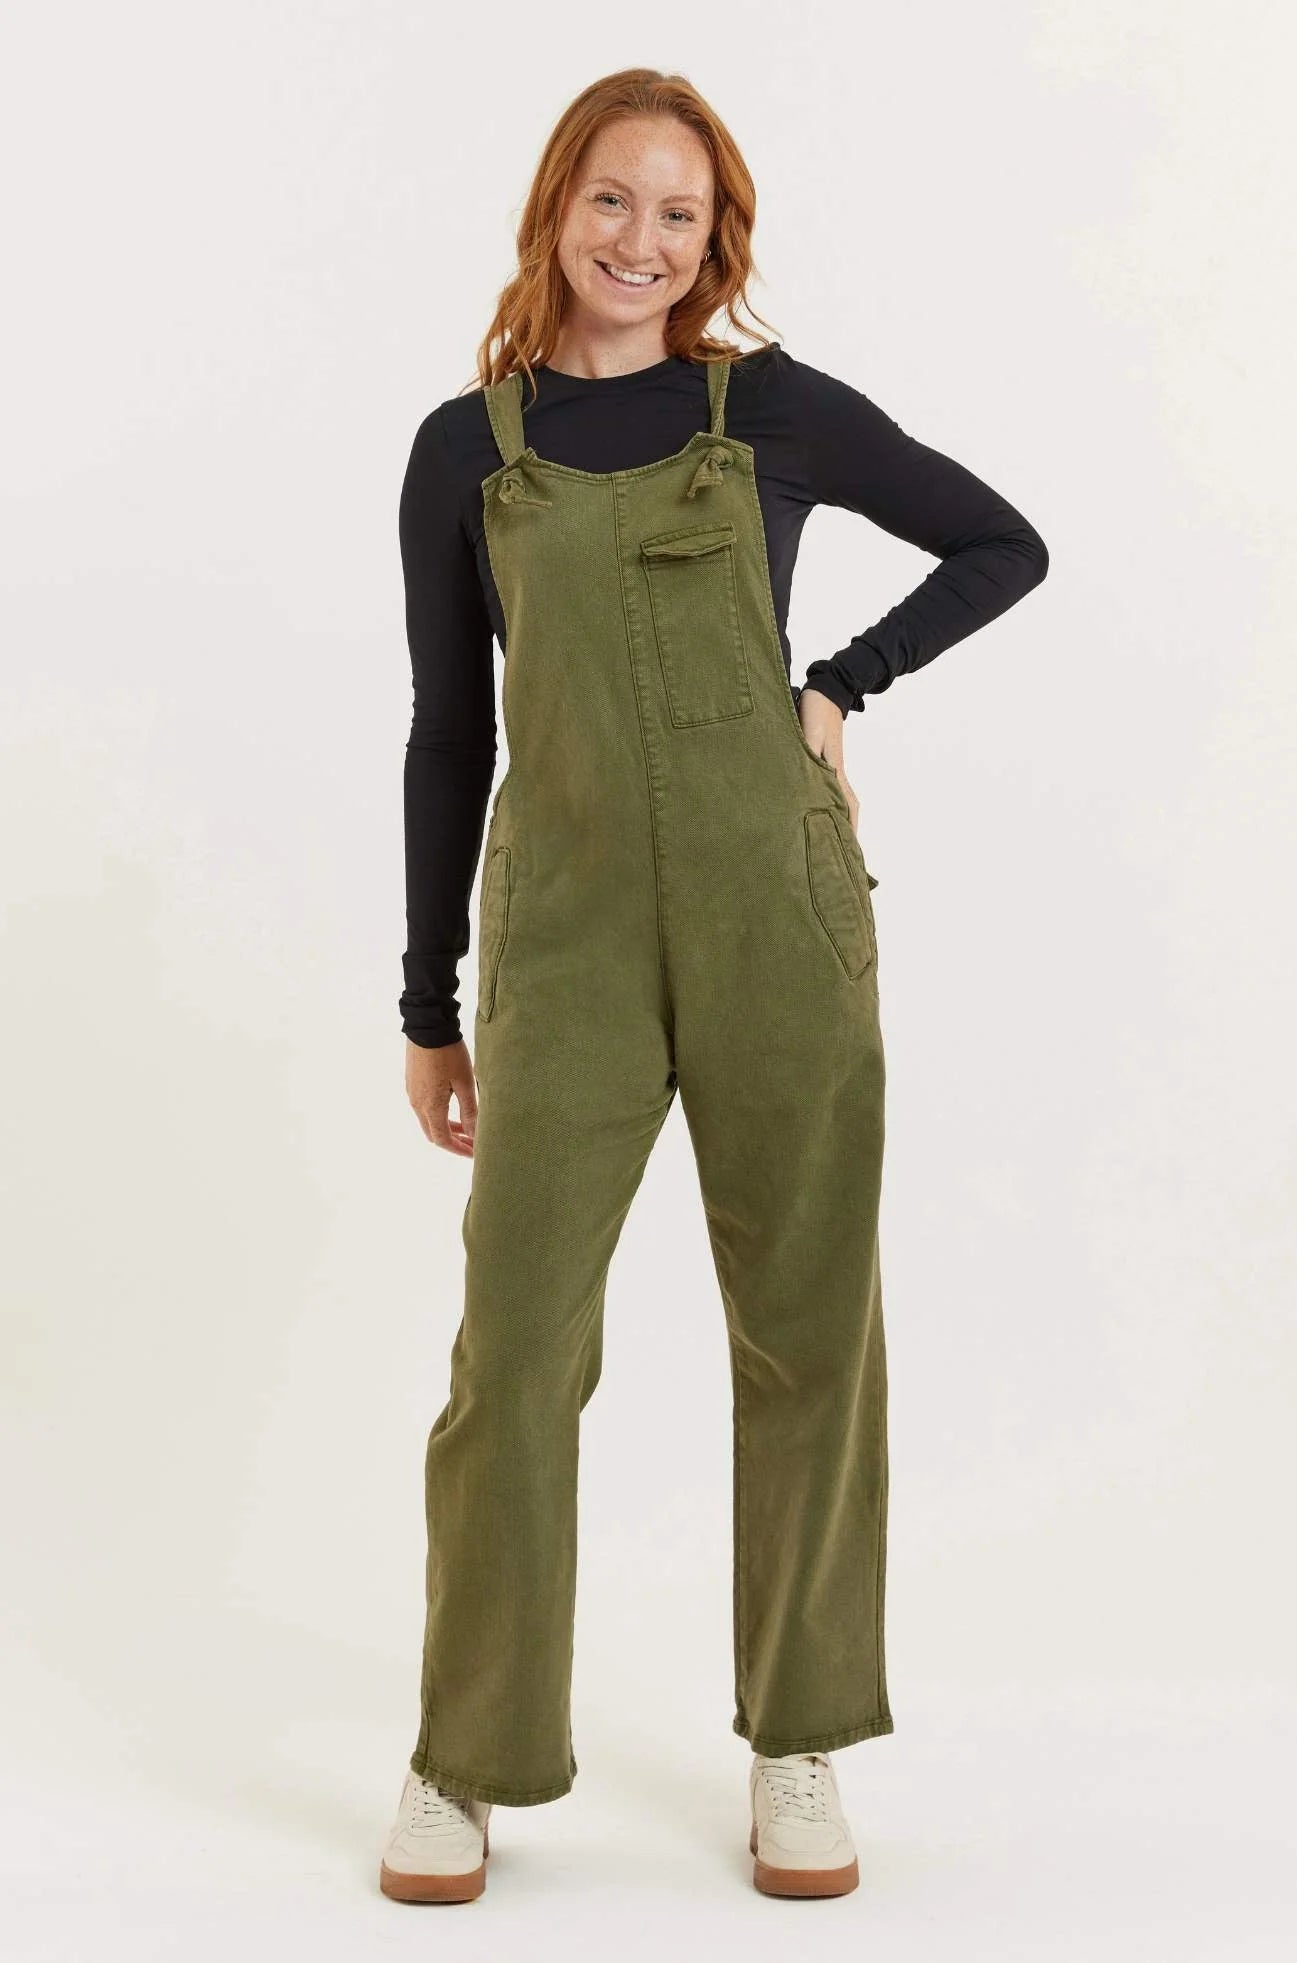 Flax and Loom Mary-Lou Recycled Wood Denim Dungarees - Olive